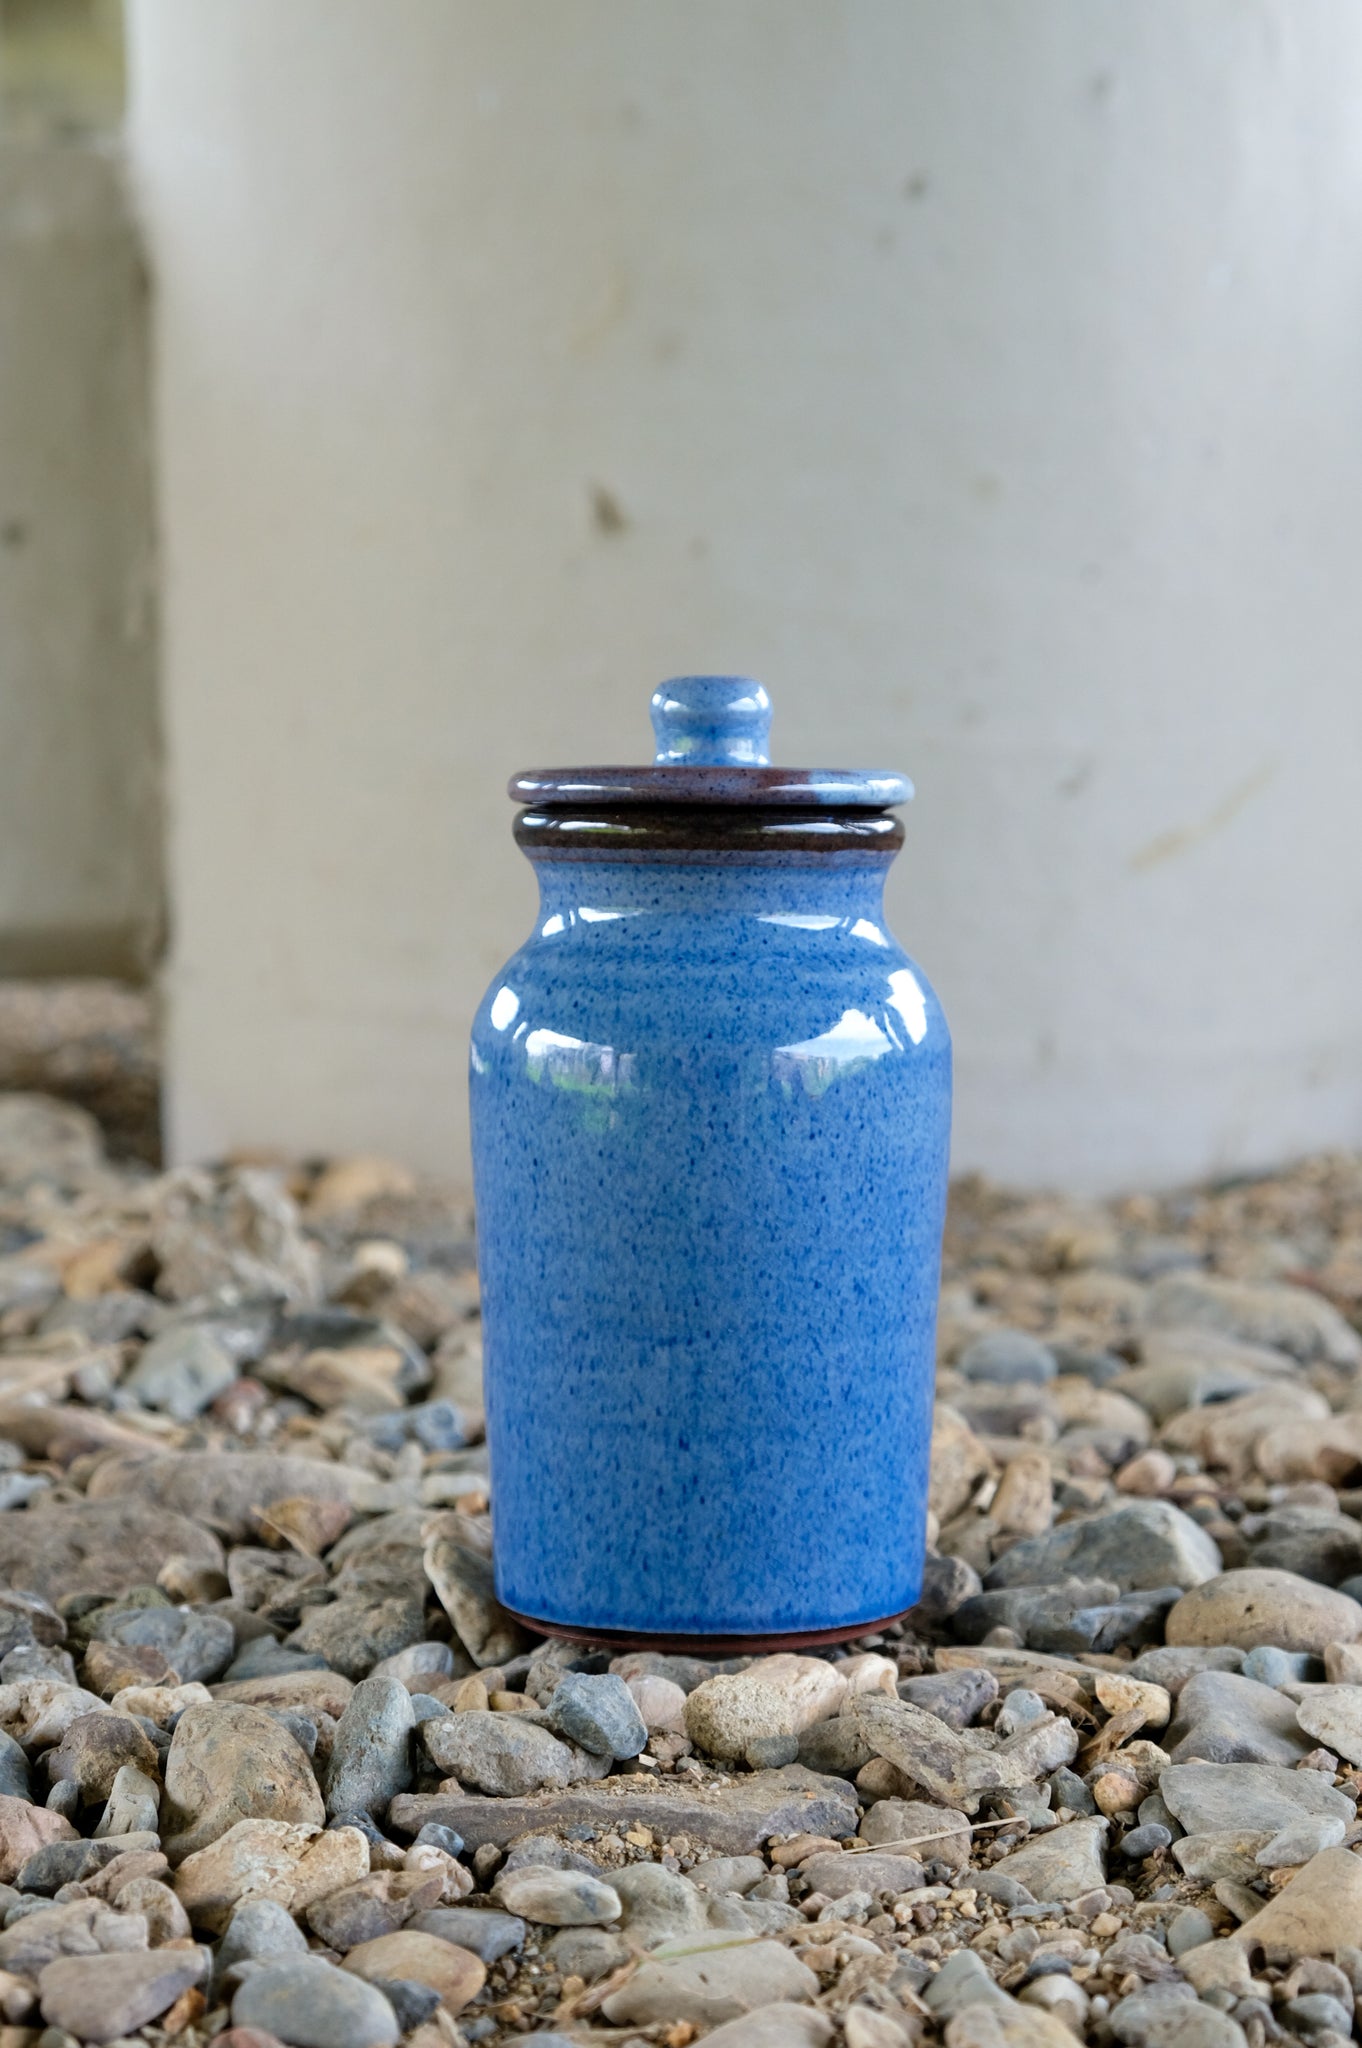 TENDER Co. "HAND THROWN NATURAL RED CLAY JAR / BLUE"